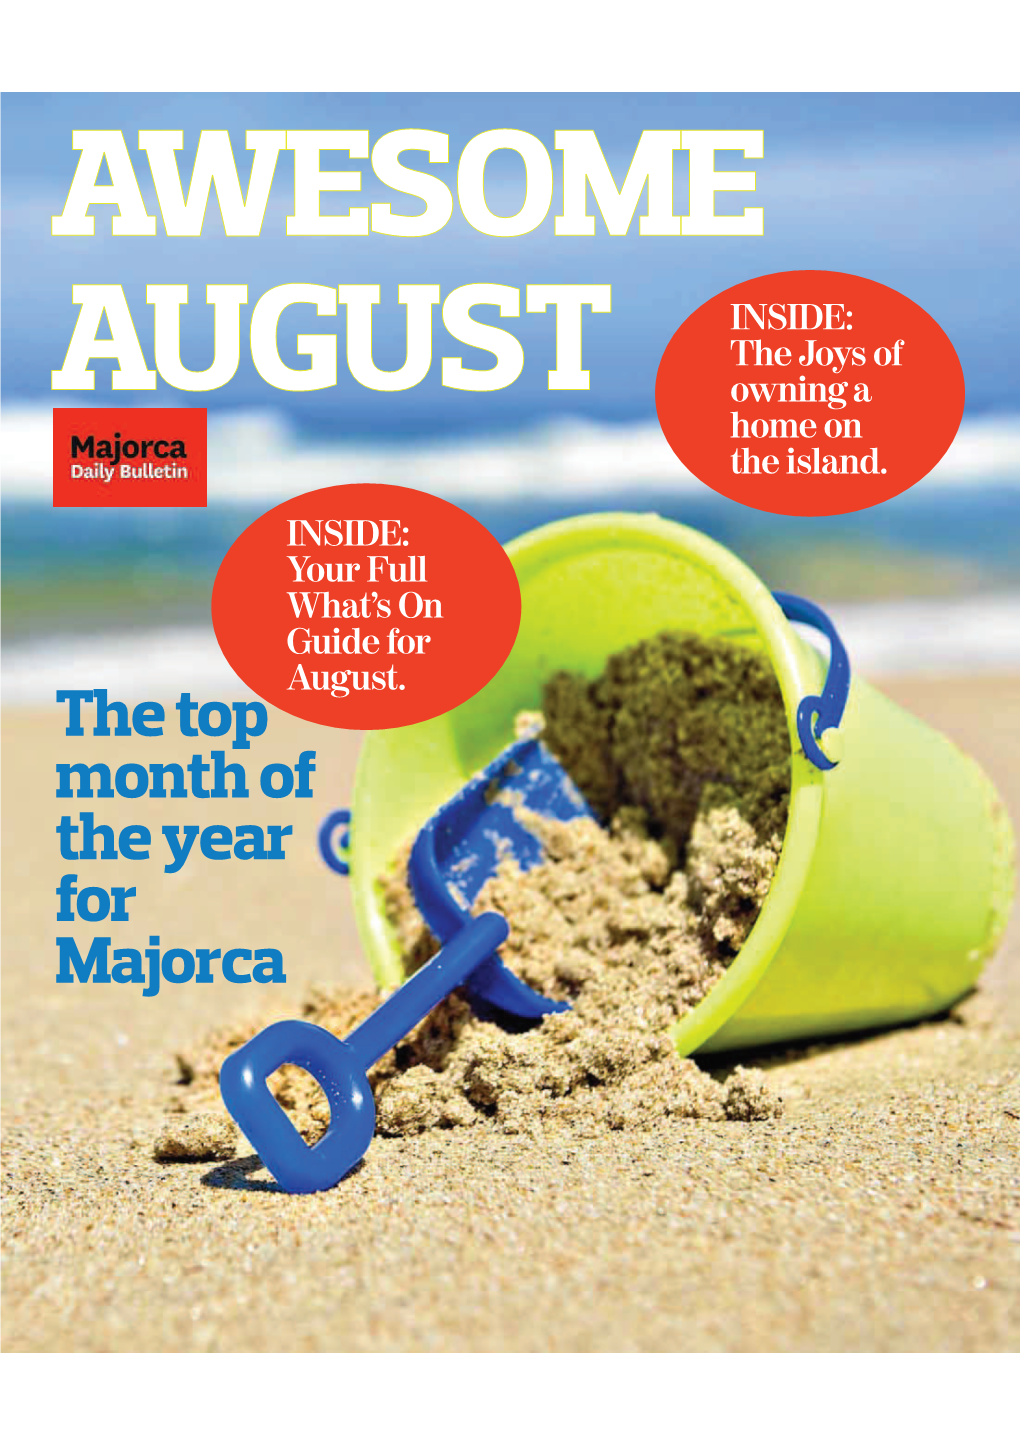 MAJORCA DAILY BULLETIN AWESSUMMERO SPECIALME SPECIAL SUPPLEMENT 1 INSIDE: the Joys of AUGUST Owning a Home on the Island